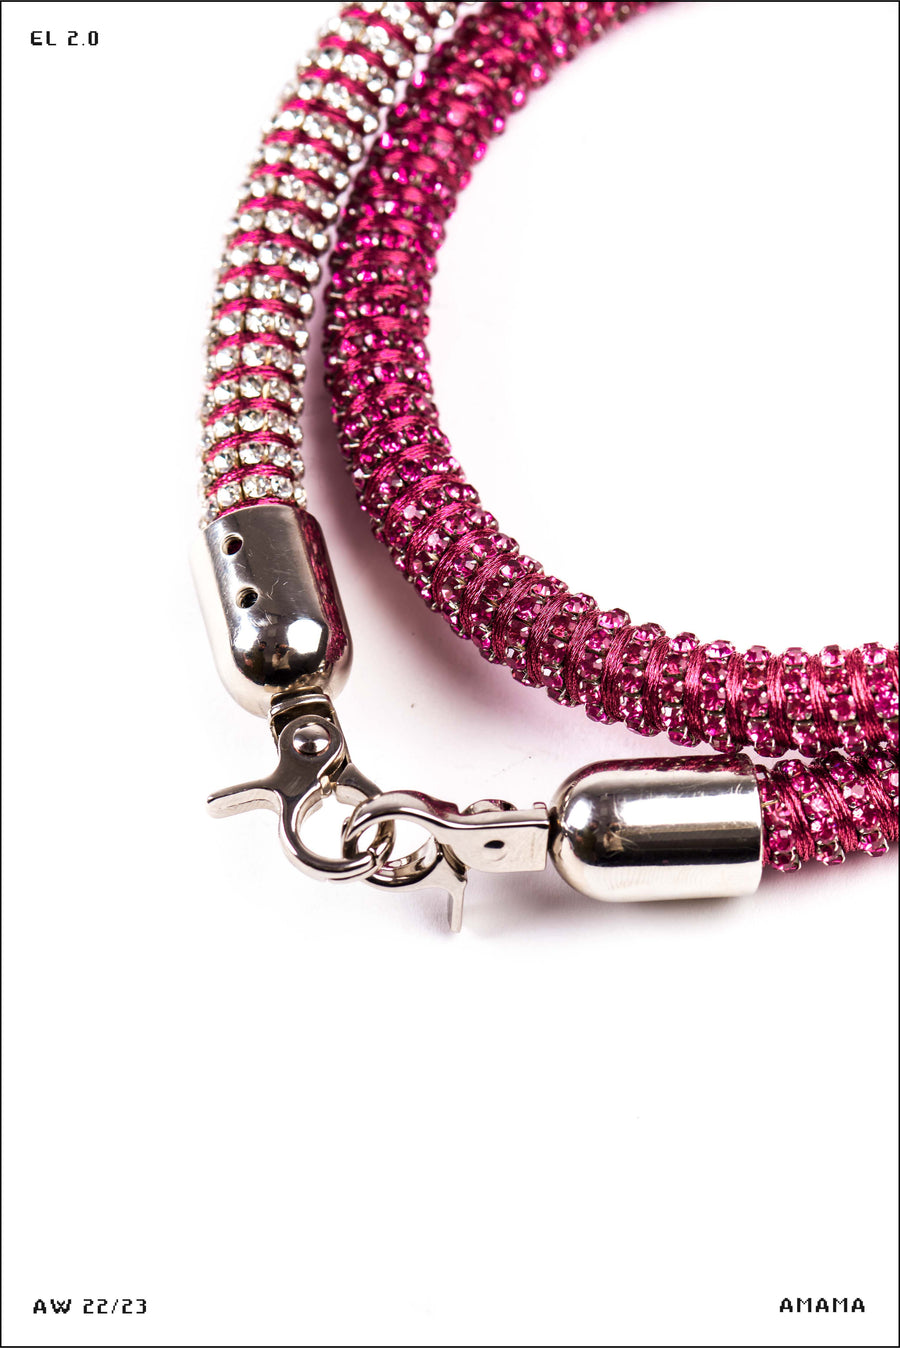 Tortile Wrap Necklace in Hot Pink